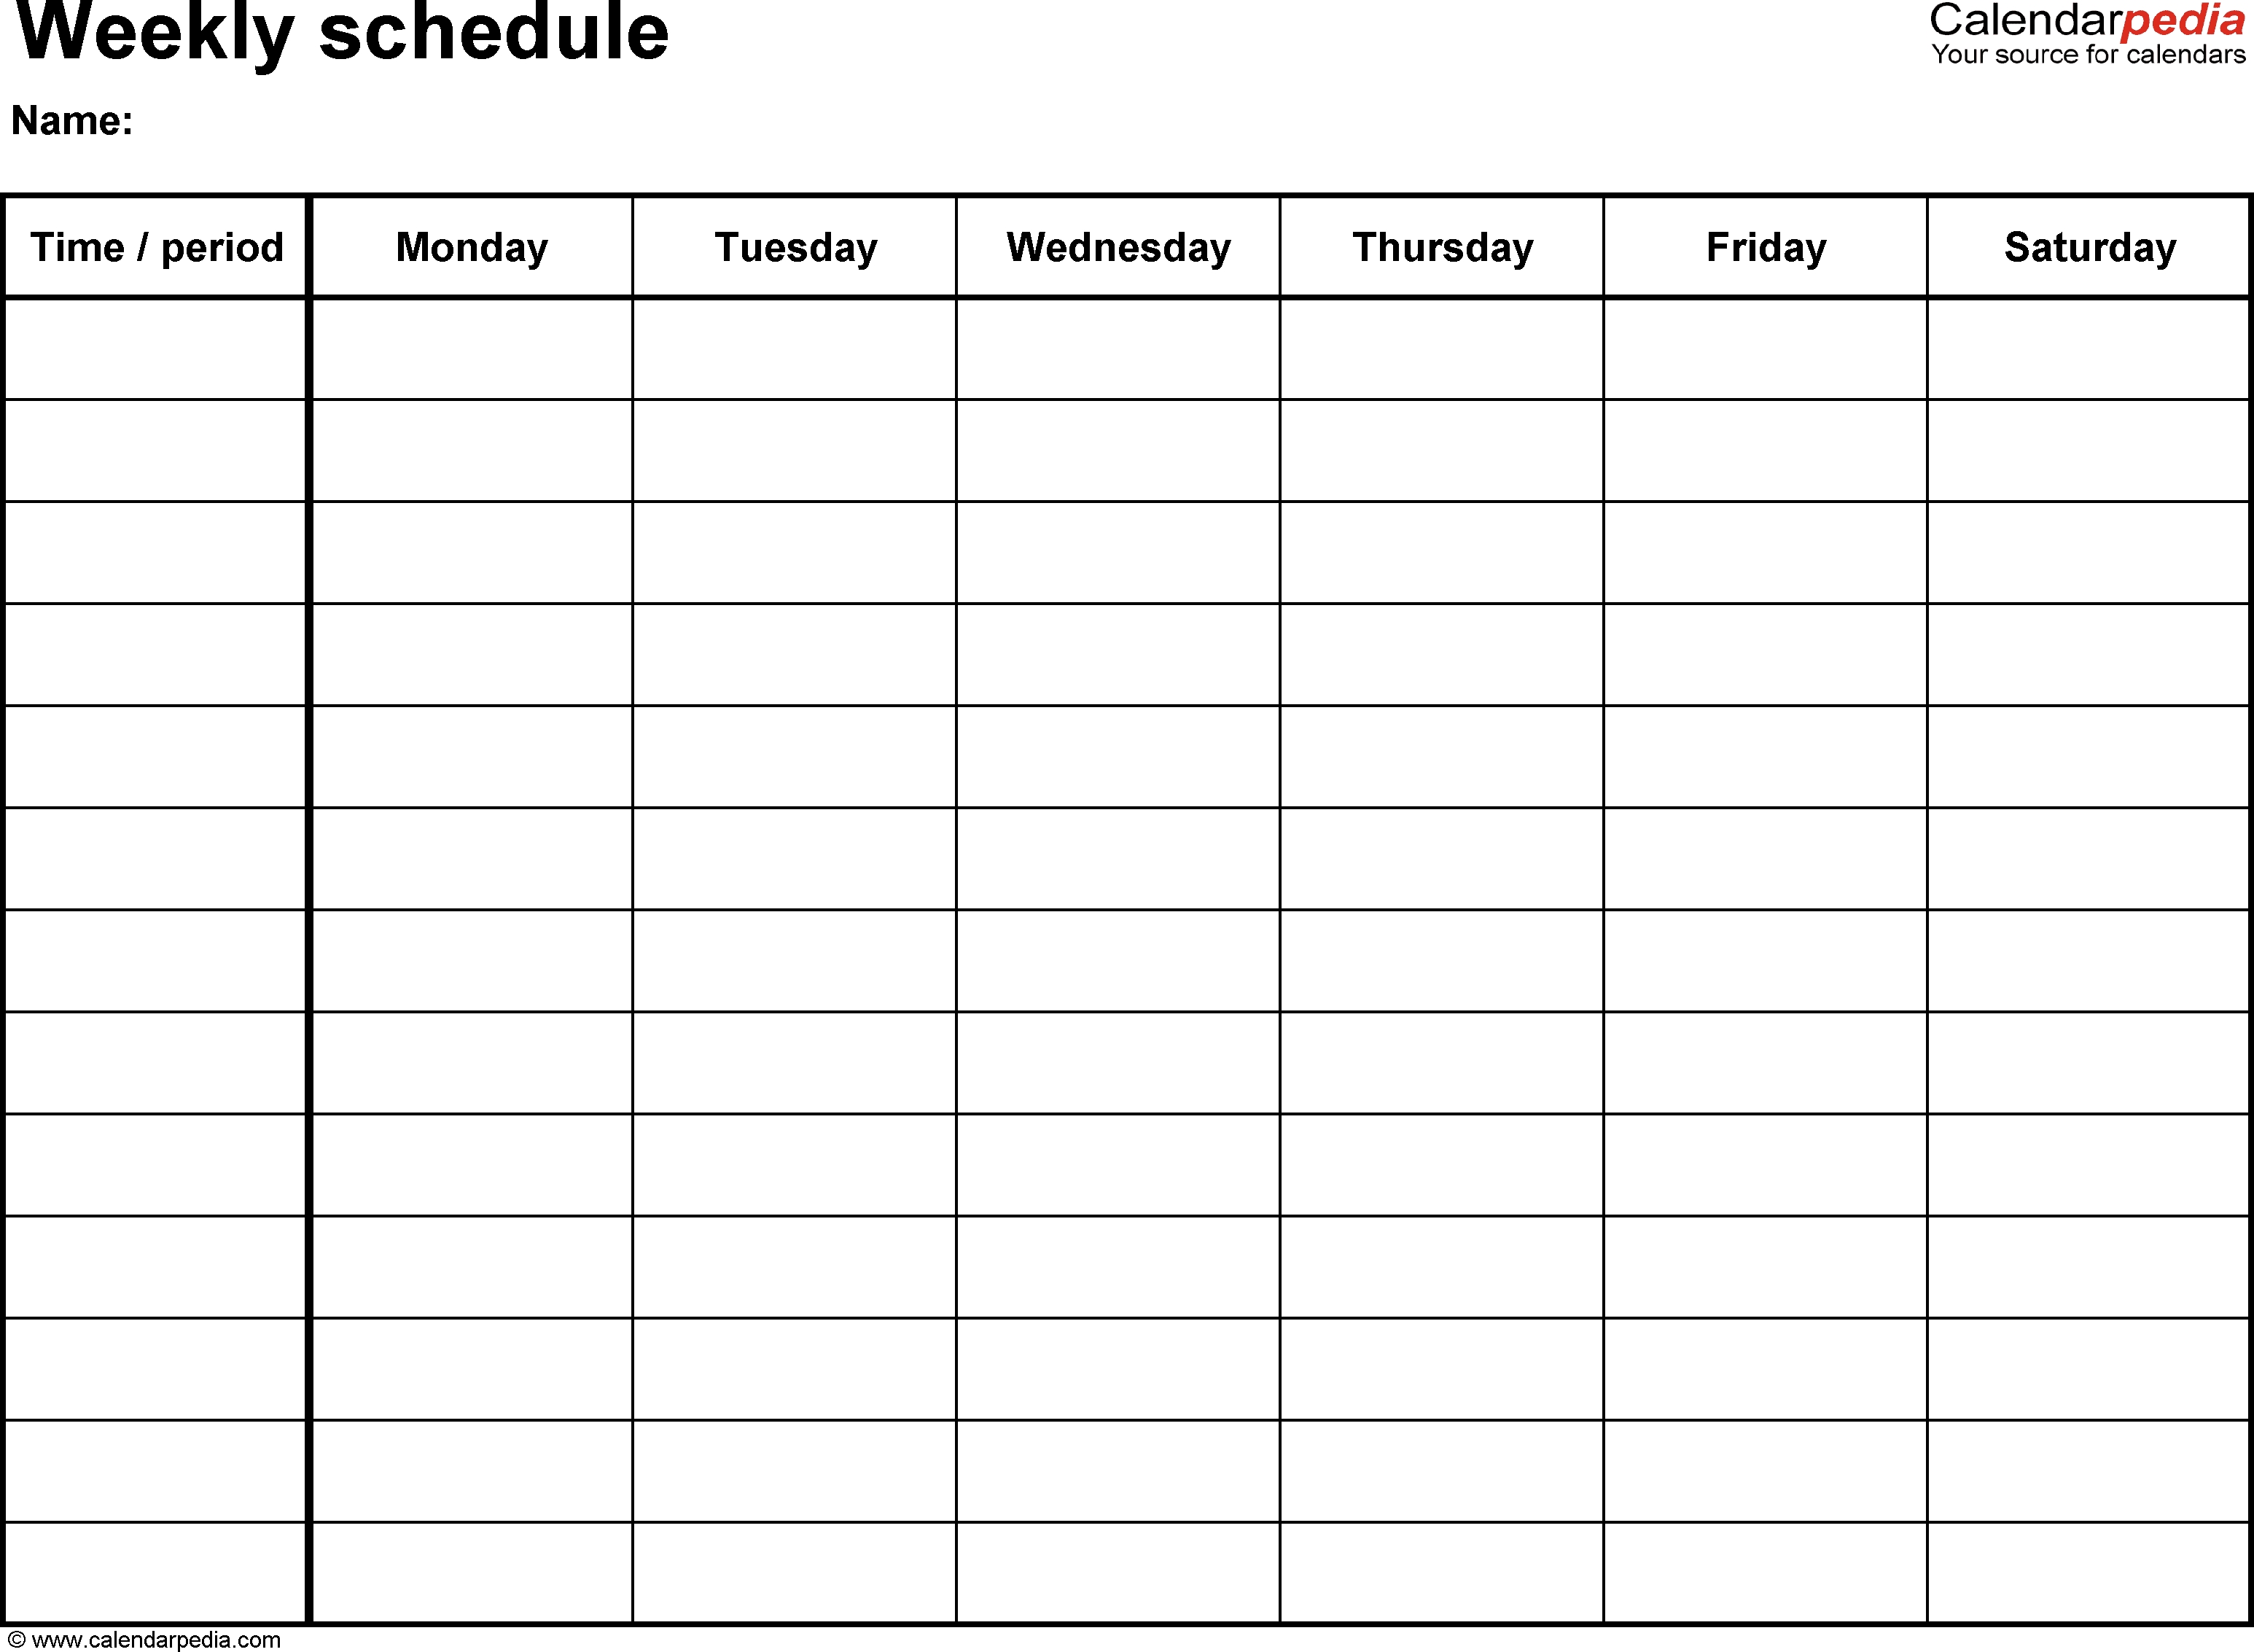 Free Weekly Schedule Templates For Pdf - 18 Templates with regard to Free Printable Weekly Schedule Page